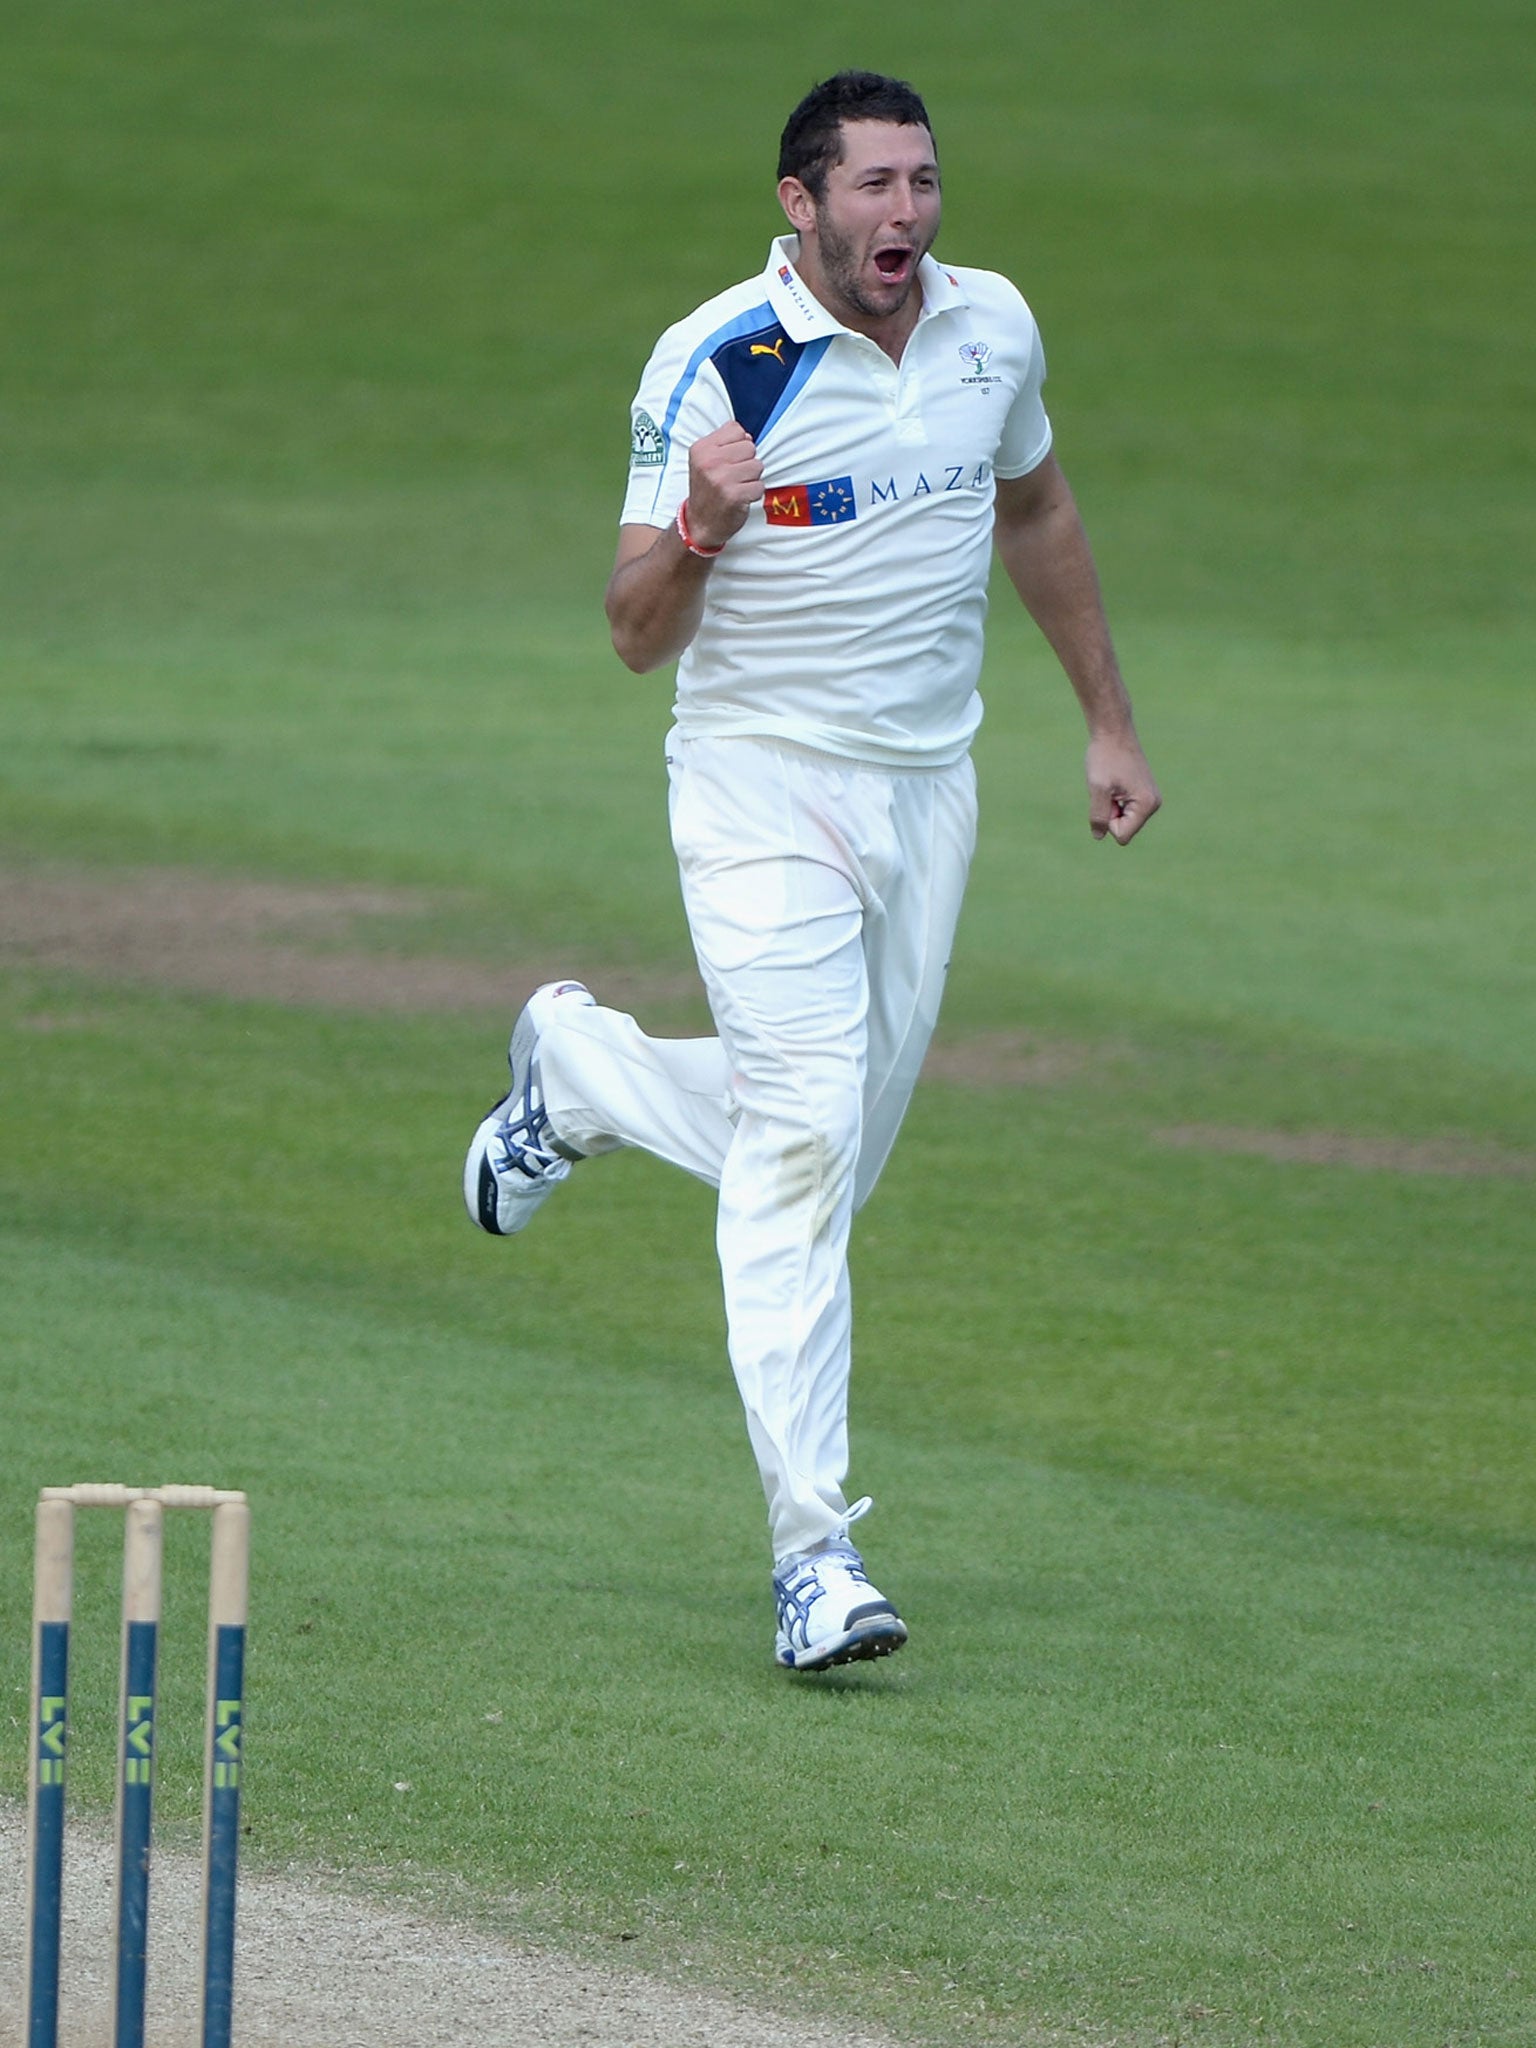 Tim Bresnan in action for Yorkshire on his way to taking three wickets at Headingley